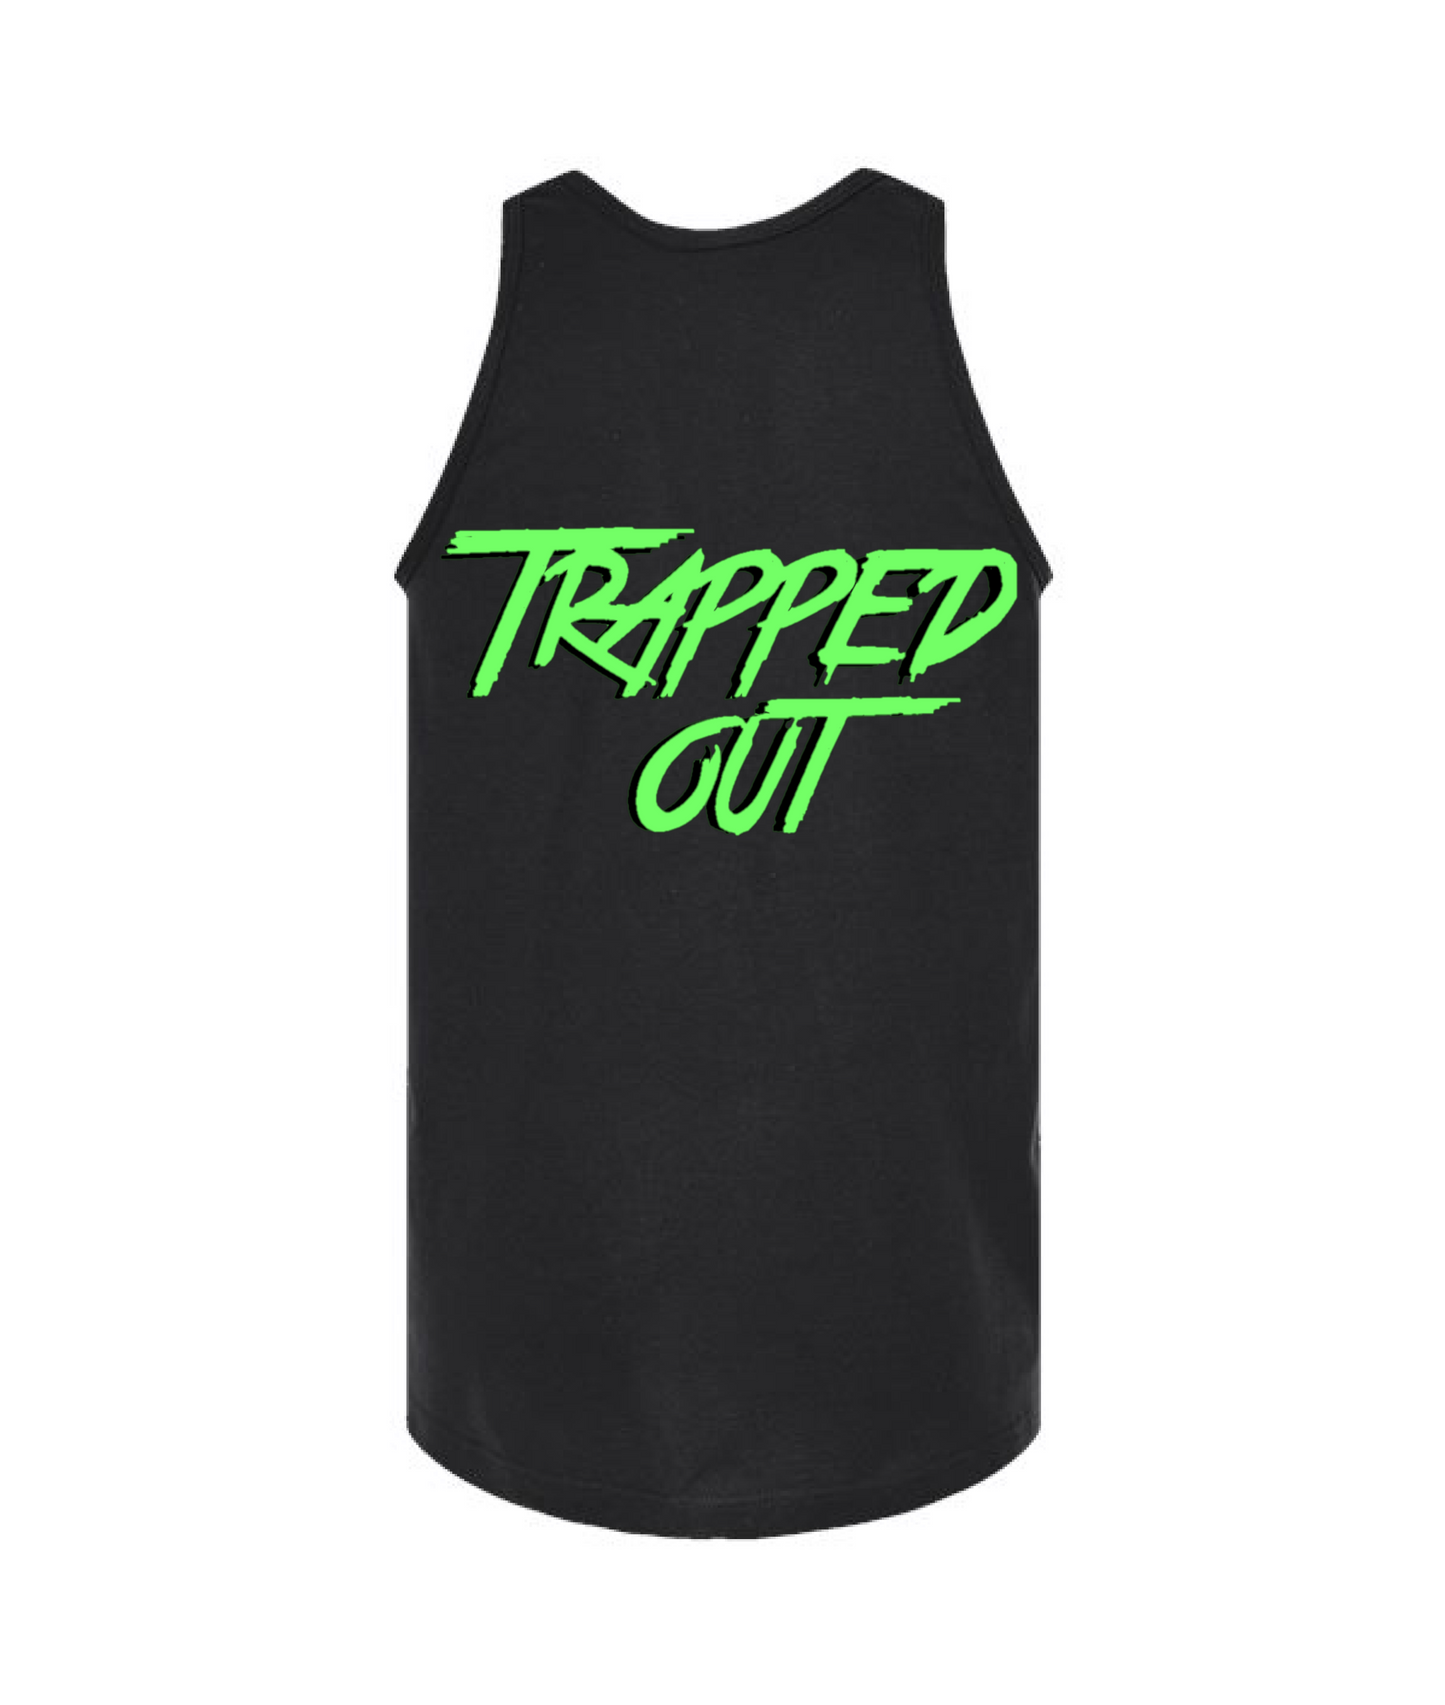 Secluded Trap - Secluded Trap - Black Tank Top